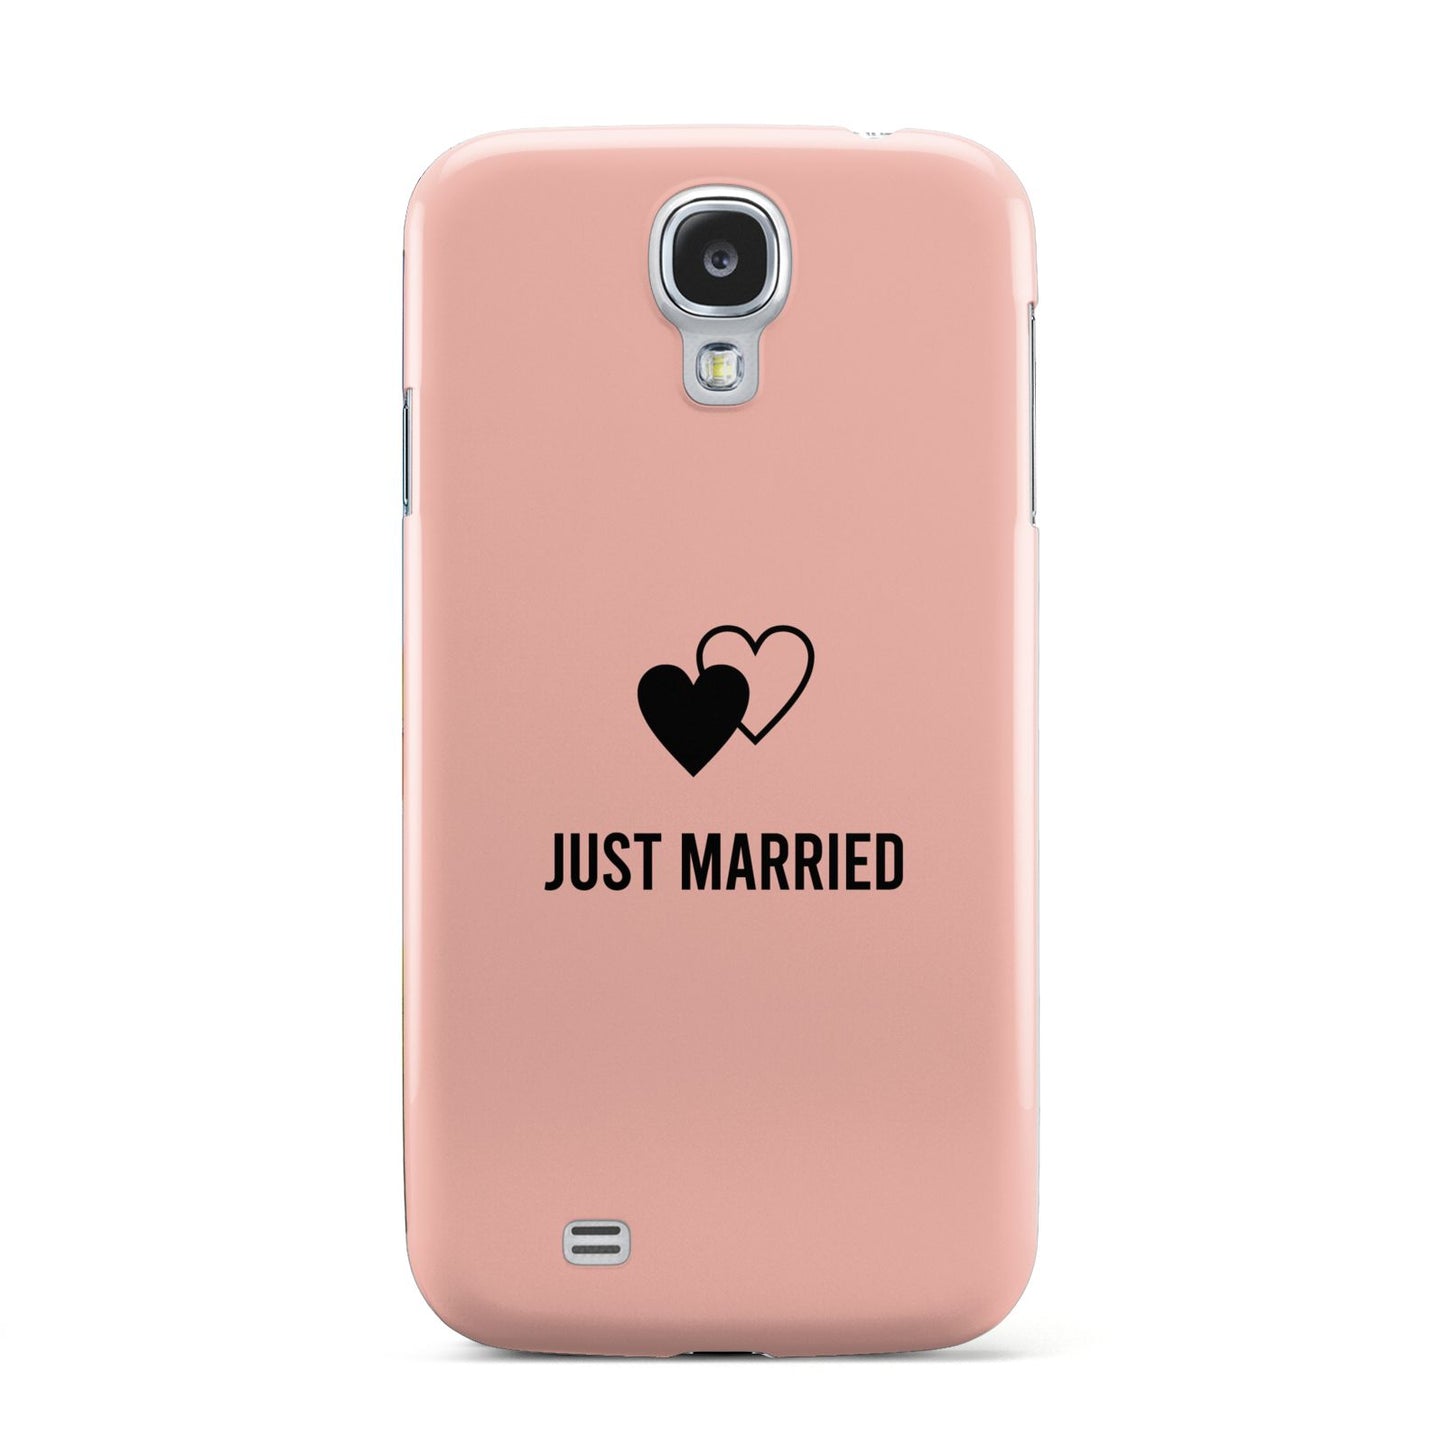 Just Married Samsung Galaxy S4 Case